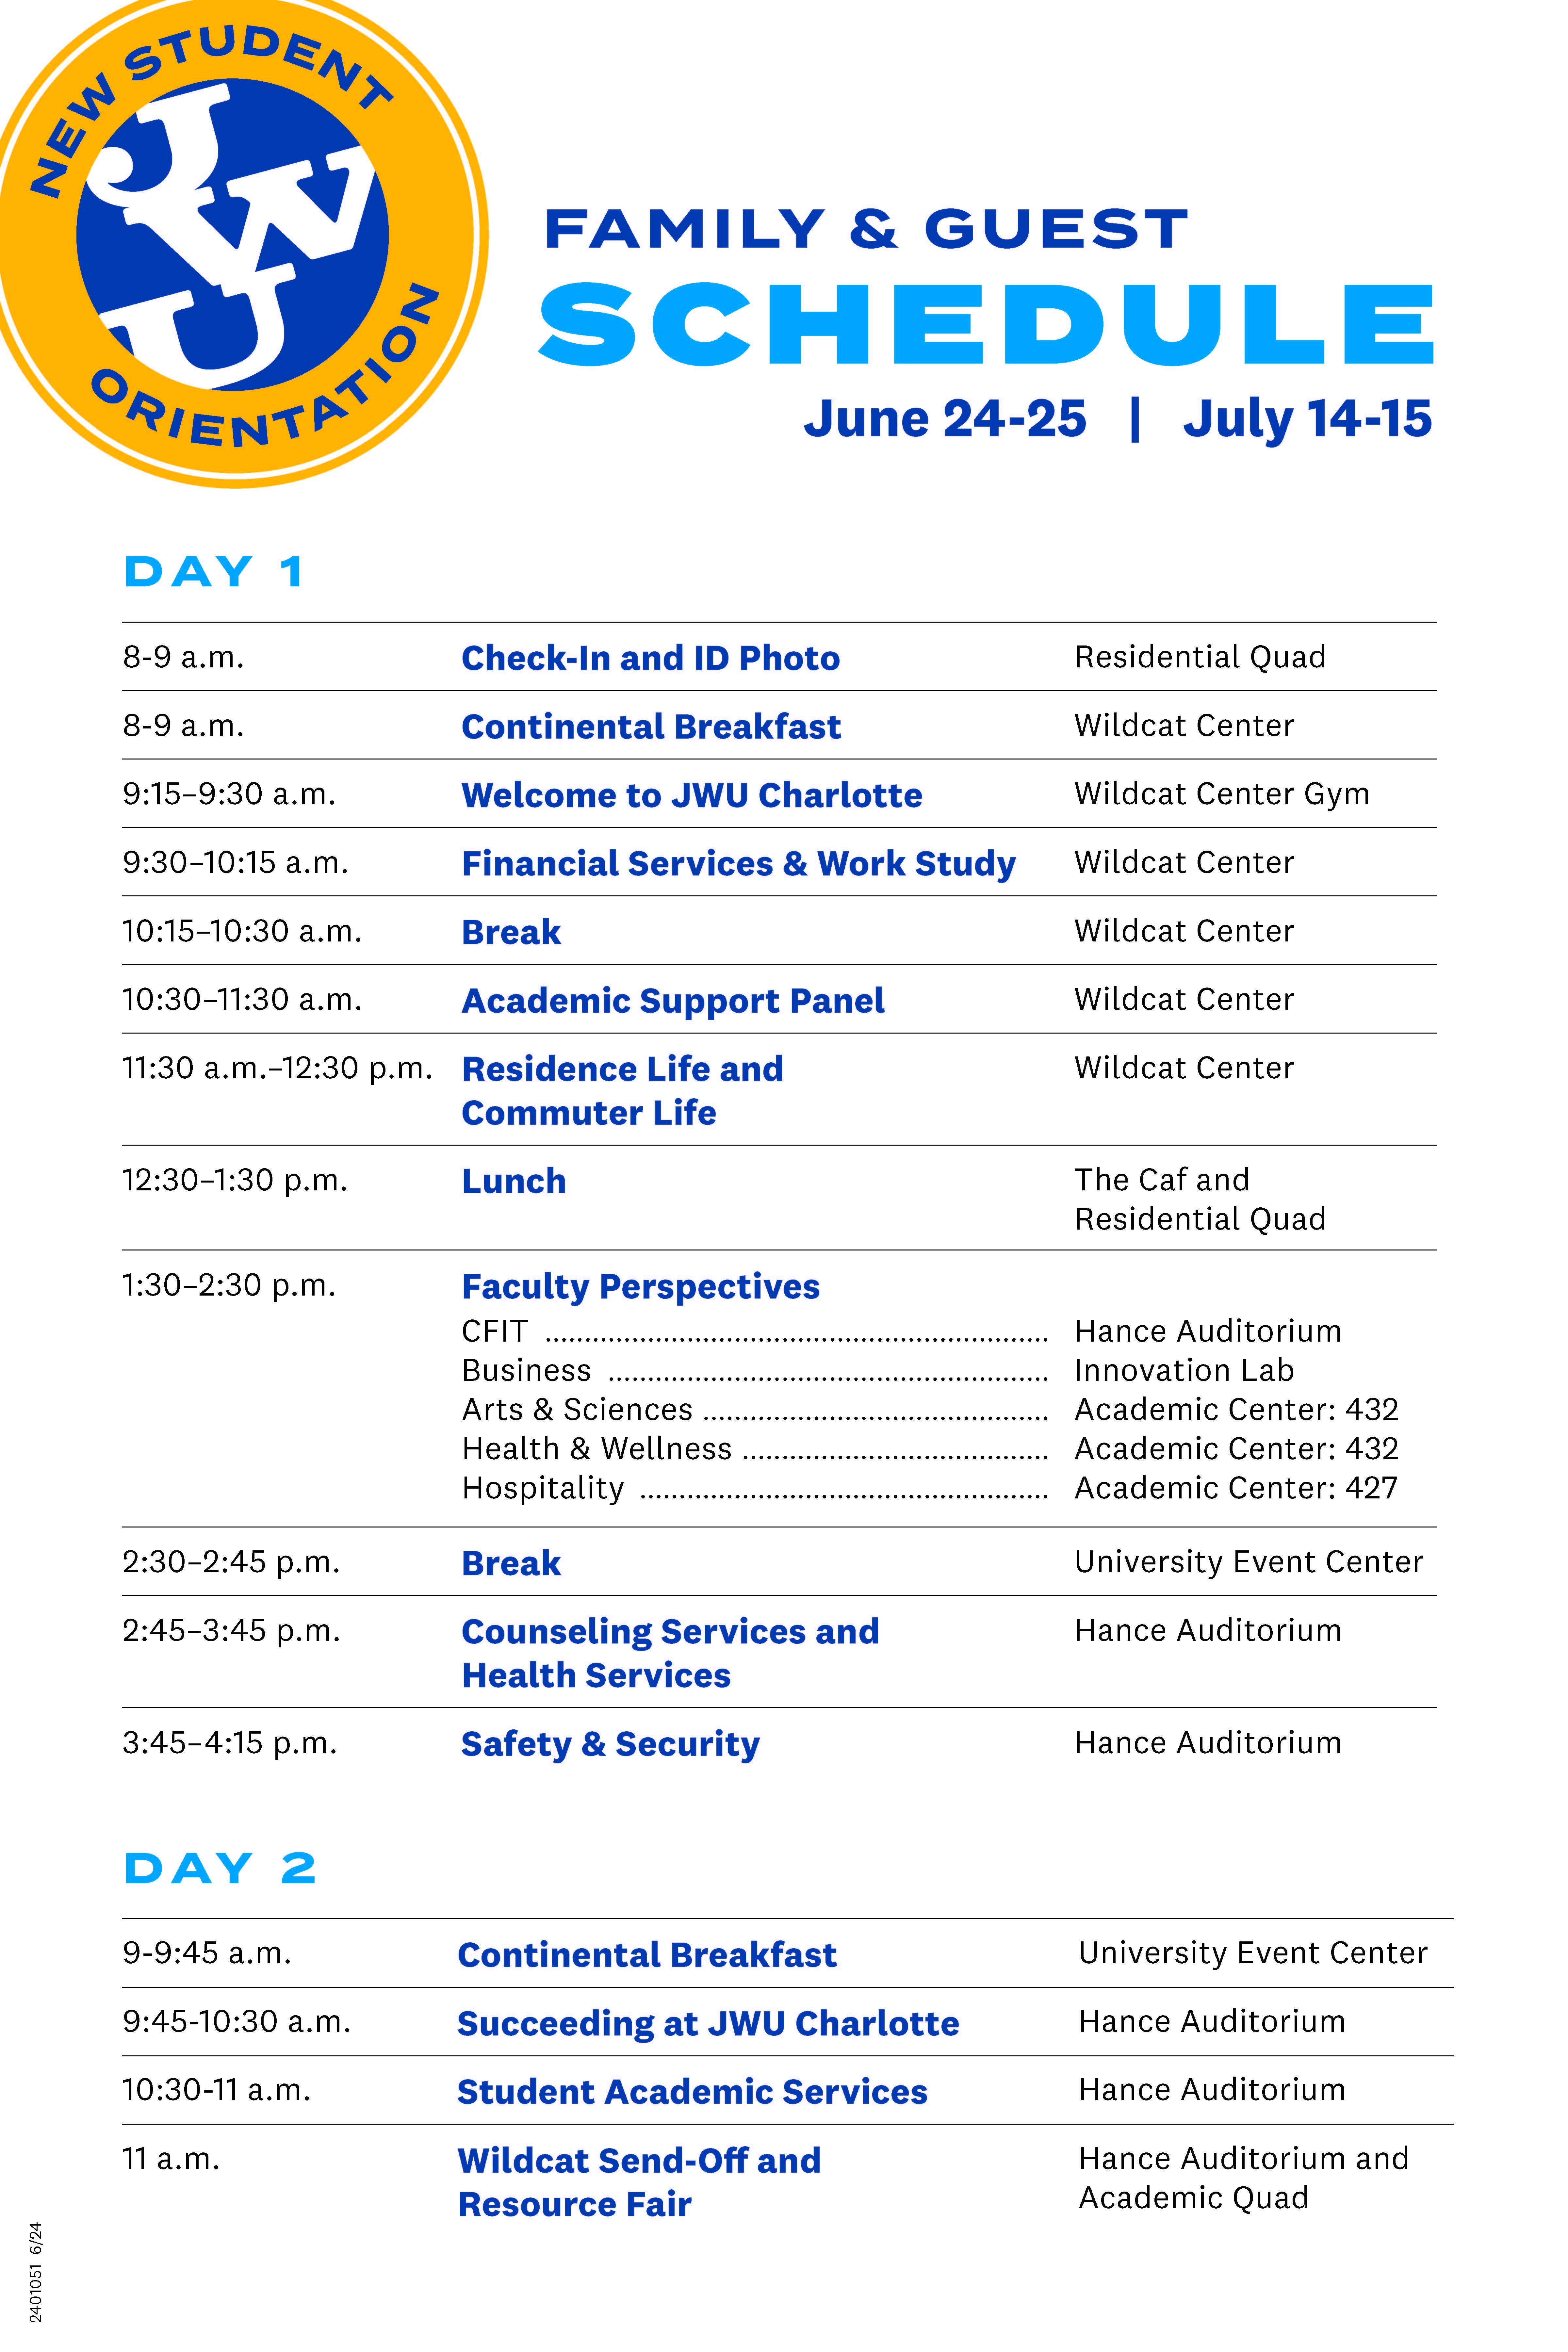 Image of the family/guest schedule: timeline is from 8am-5pm on day 1 and 8am-11am on day 2